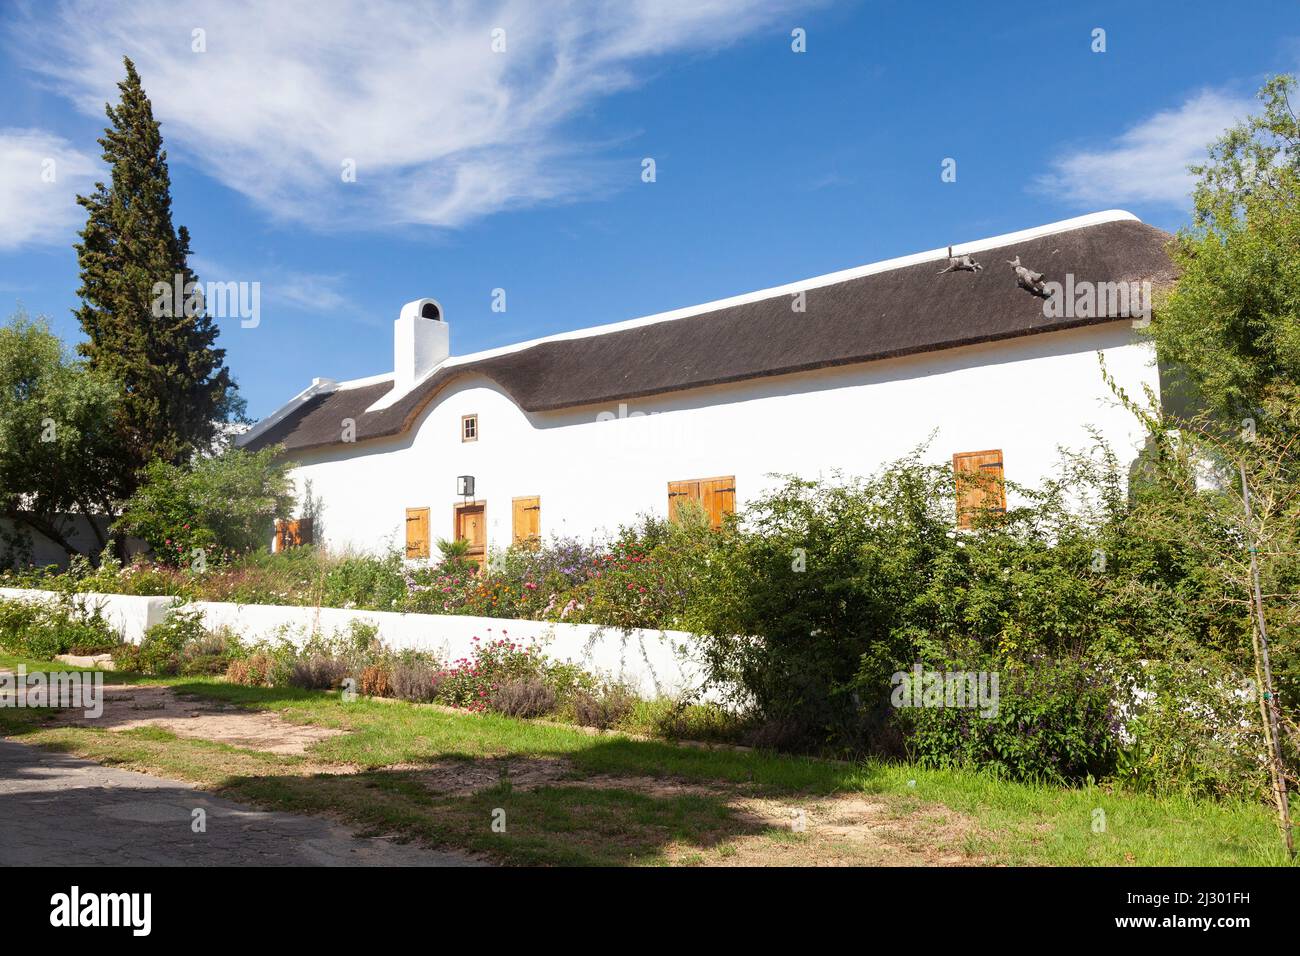 Historic Cape Dutch long house in Tulbagh, Western Cape Winelands, South Africa. Stock Photo